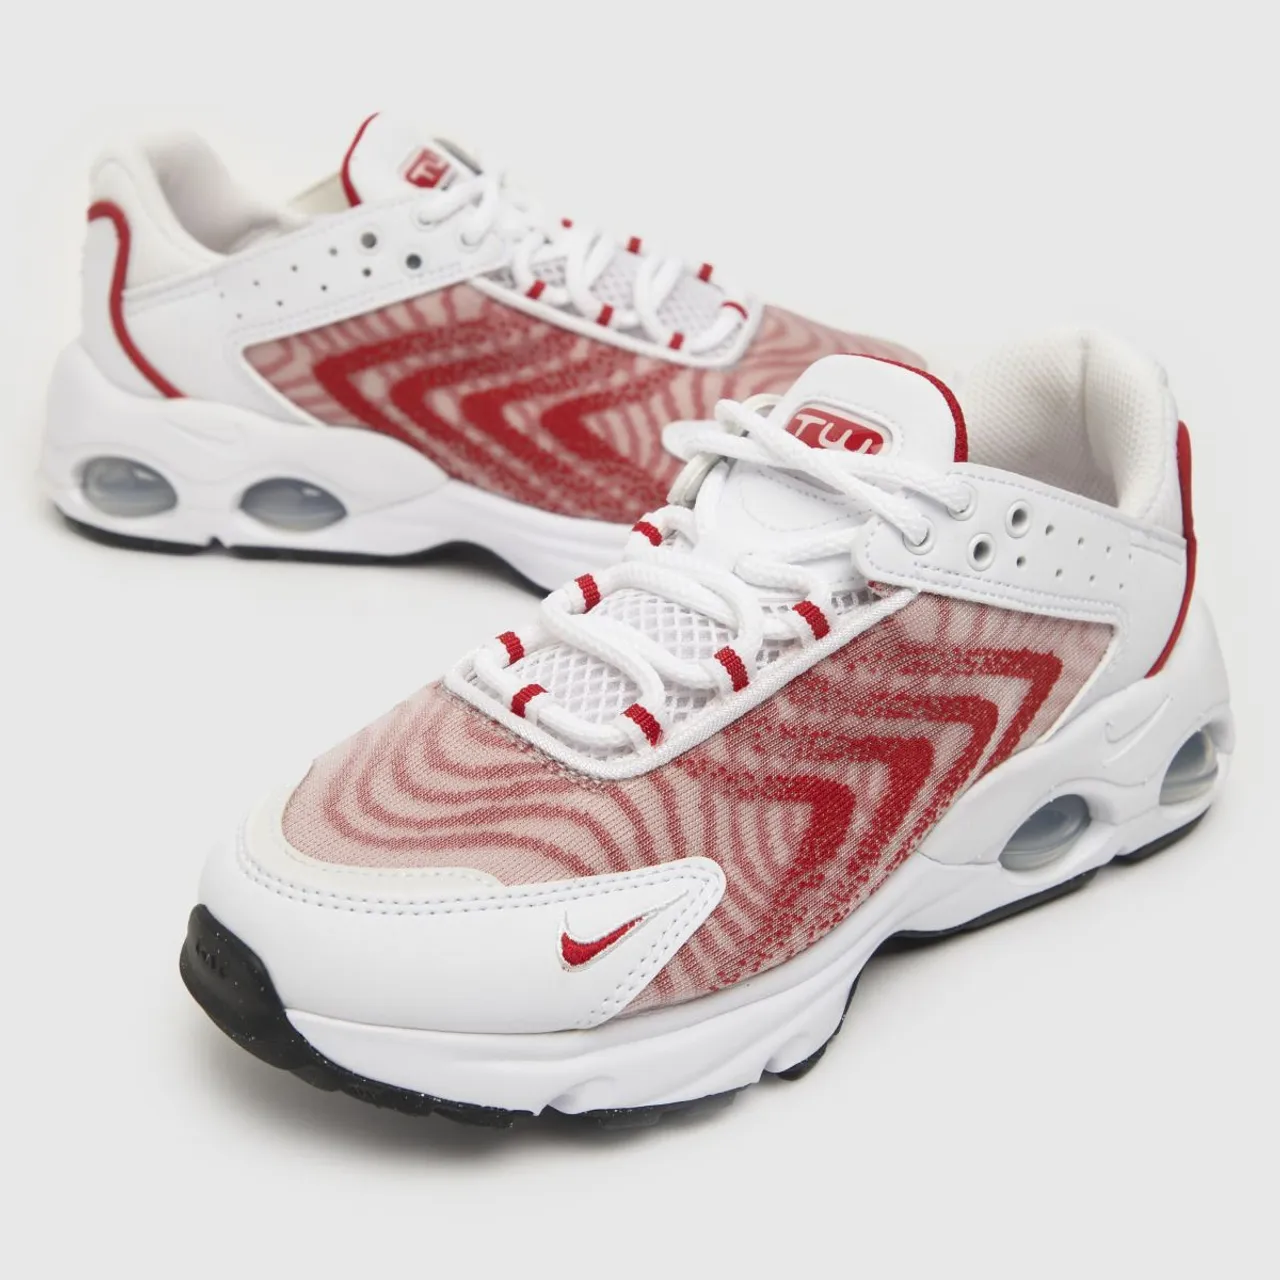 Nike White & Red Air Max Tw Girls Youth Trainers